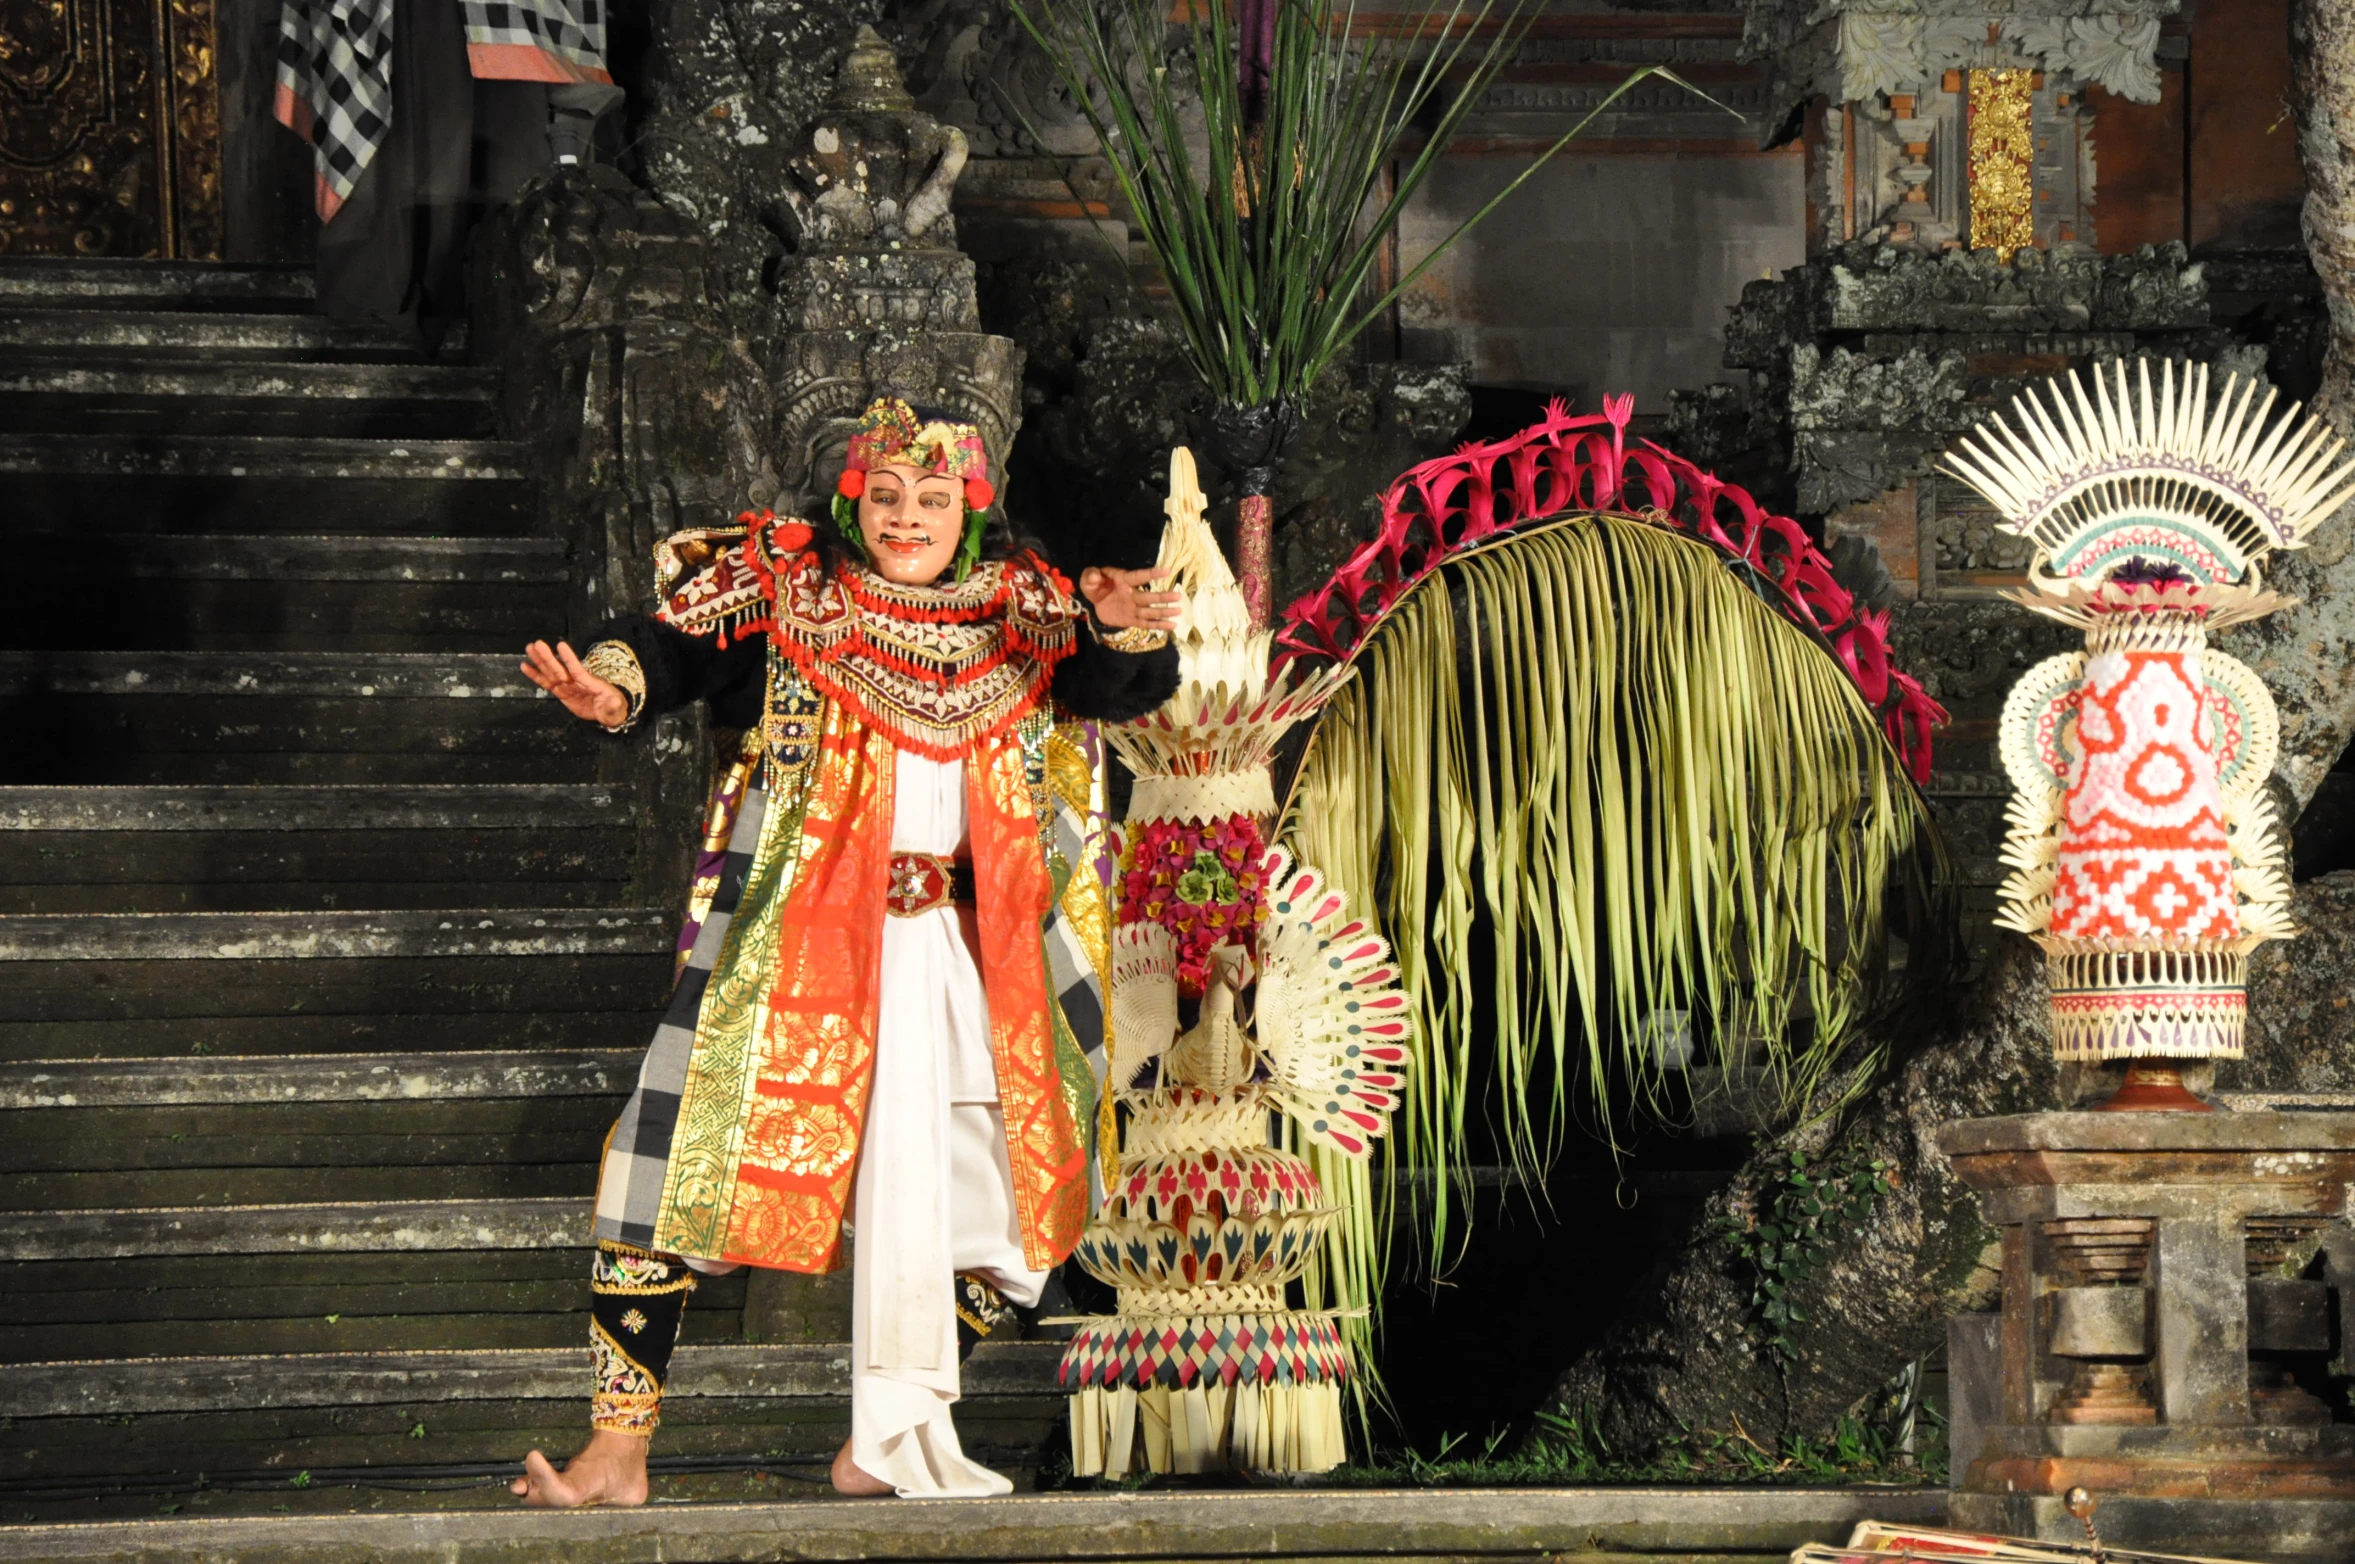 a person wearing costume standing next to a decorated stage